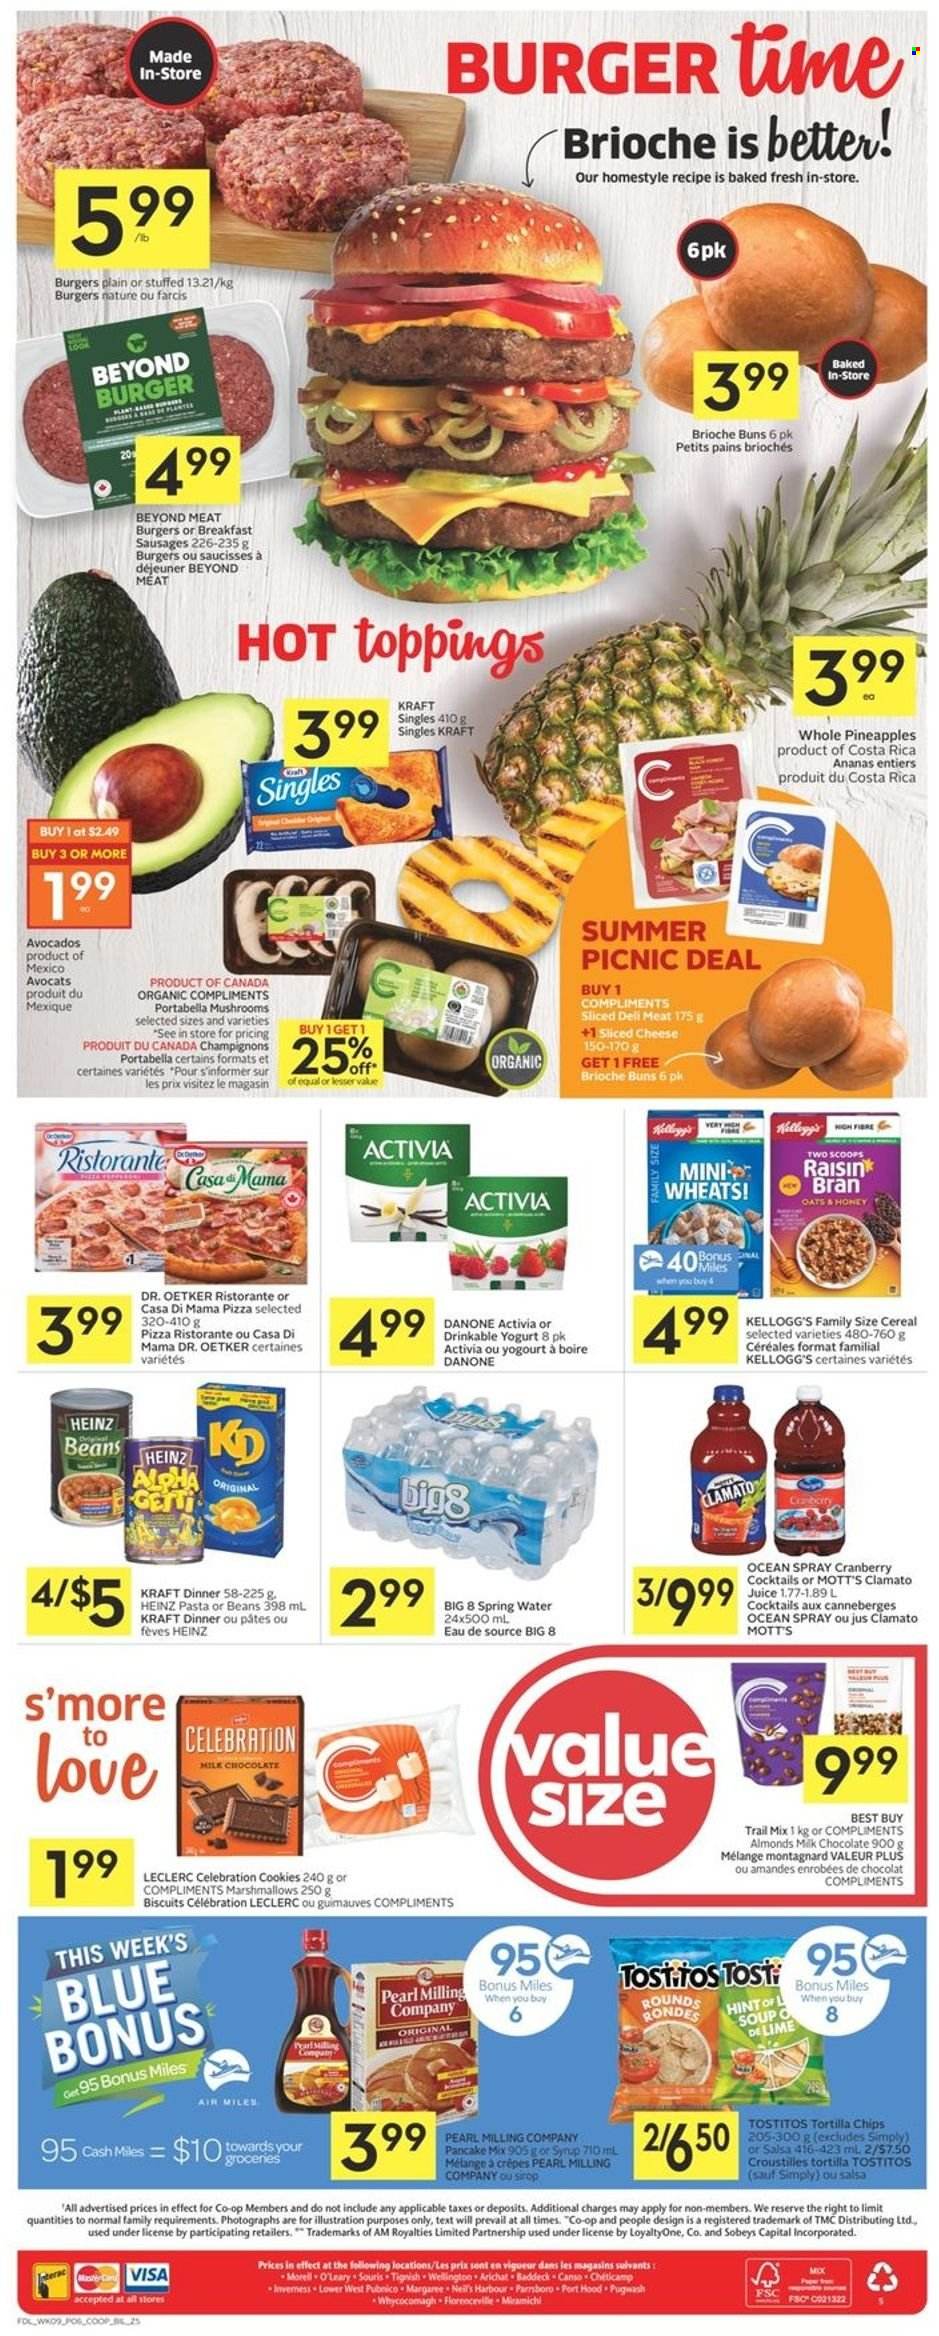 thumbnail - Co-op Flyer - June 30, 2022 - July 06, 2022 - Sales products - buns, brioche, beans, avocado, pineapple, Mott's, pizza, soup, hamburger, pancakes, Kraft®, sausage, sandwich slices, sliced cheese, Dr. Oetker, Kraft Singles, yoghurt, Activia, cookies, marshmallows, milk chocolate, chocolate, Celebration, Kellogg's, biscuit, tortilla chips, chips, Tostitos, cereals, Raisin Bran, salsa, honey, almonds, trail mix, juice, Clamato, spring water, Heinz, Danone. Page 6.